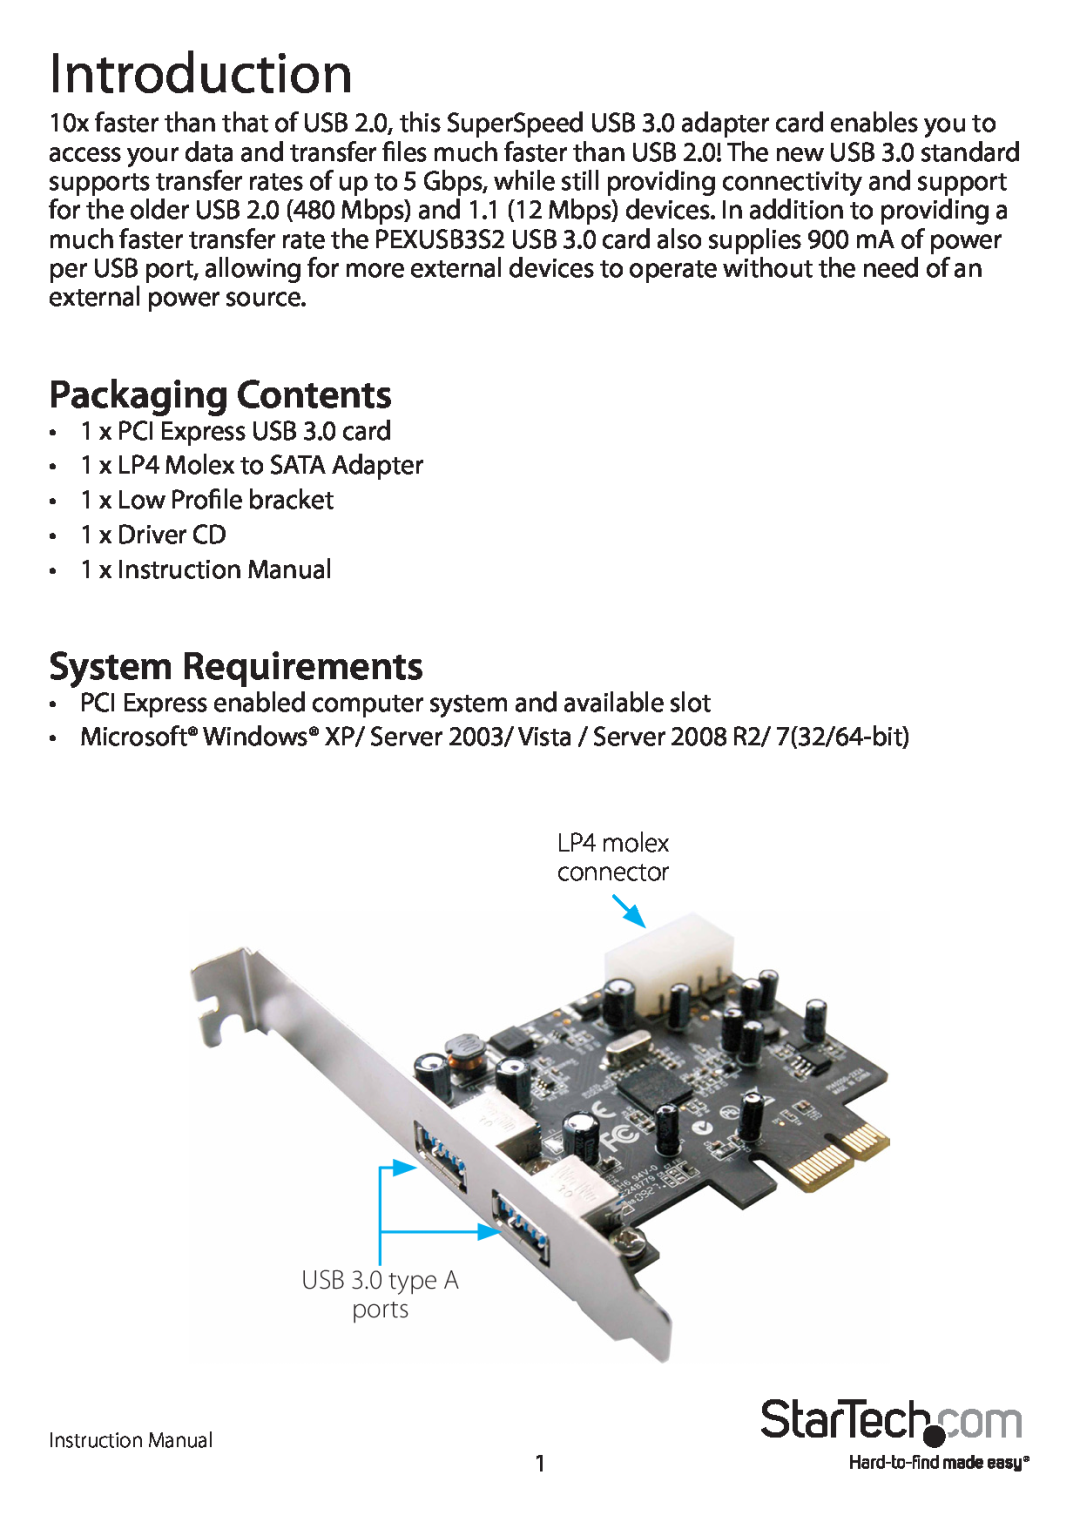 StarTech.com PEXUSB3S2 manual Introduction, Packaging Contents, System Requirements 